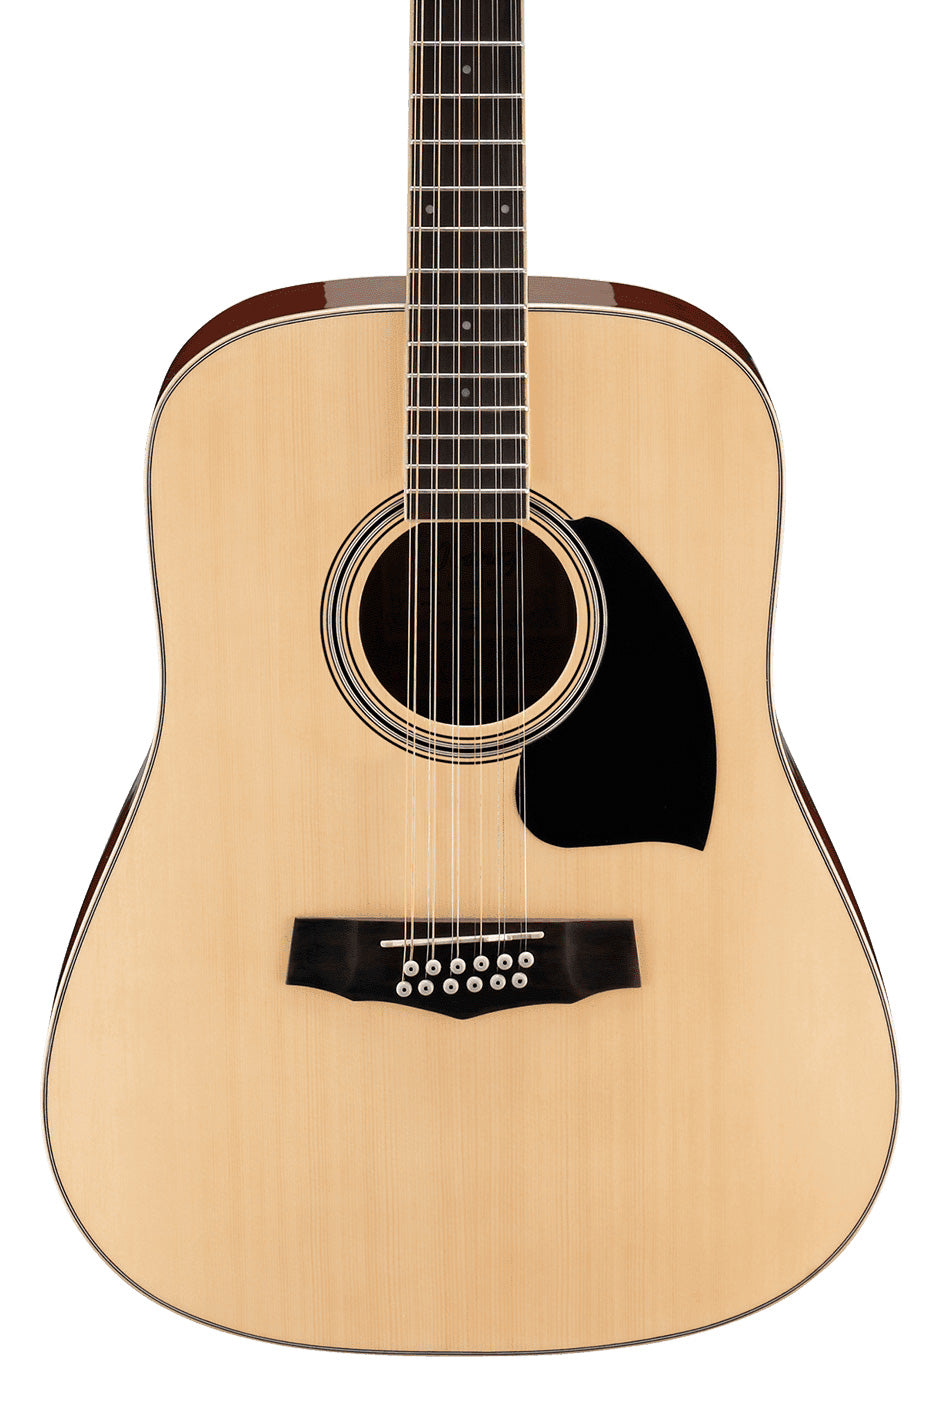 Ibanez 12-String Dreadnought Acoustic Guitar - Natural High Gloss